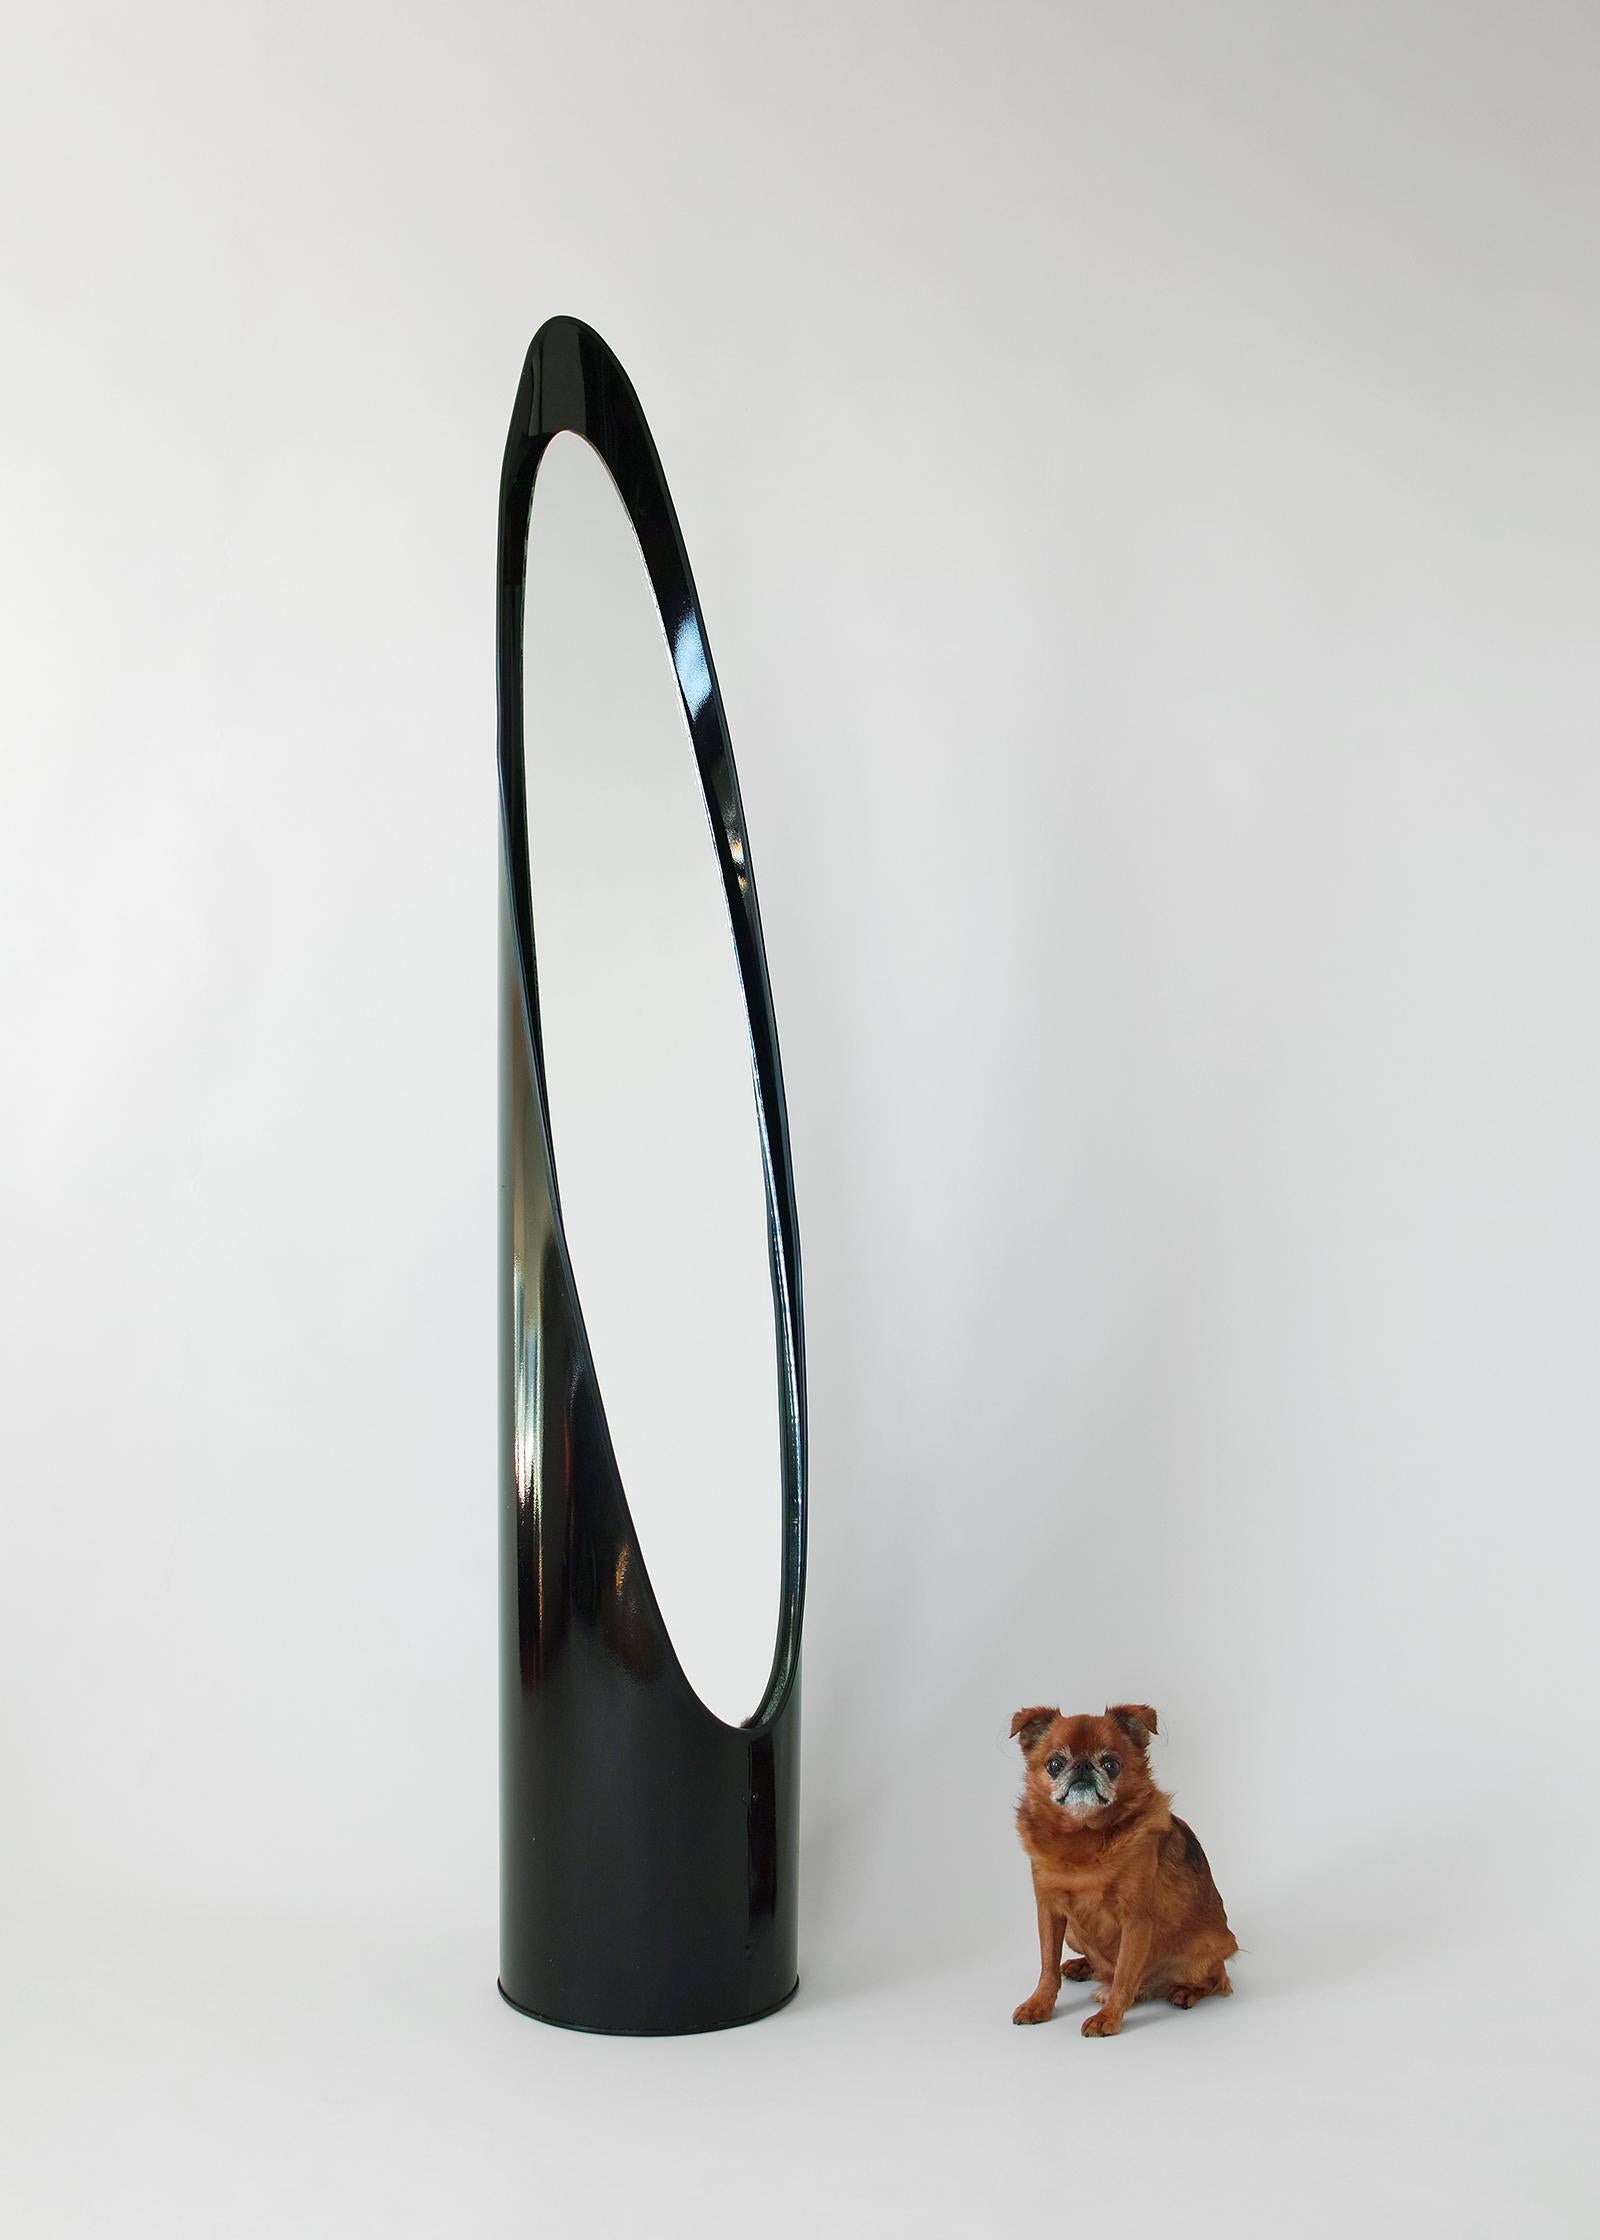 For your consideration is this freestanding full length lipstick mirror featuring a modern sliced tubular form with original inset glass mirror and black finish. It has a striking form and a nice compact 12